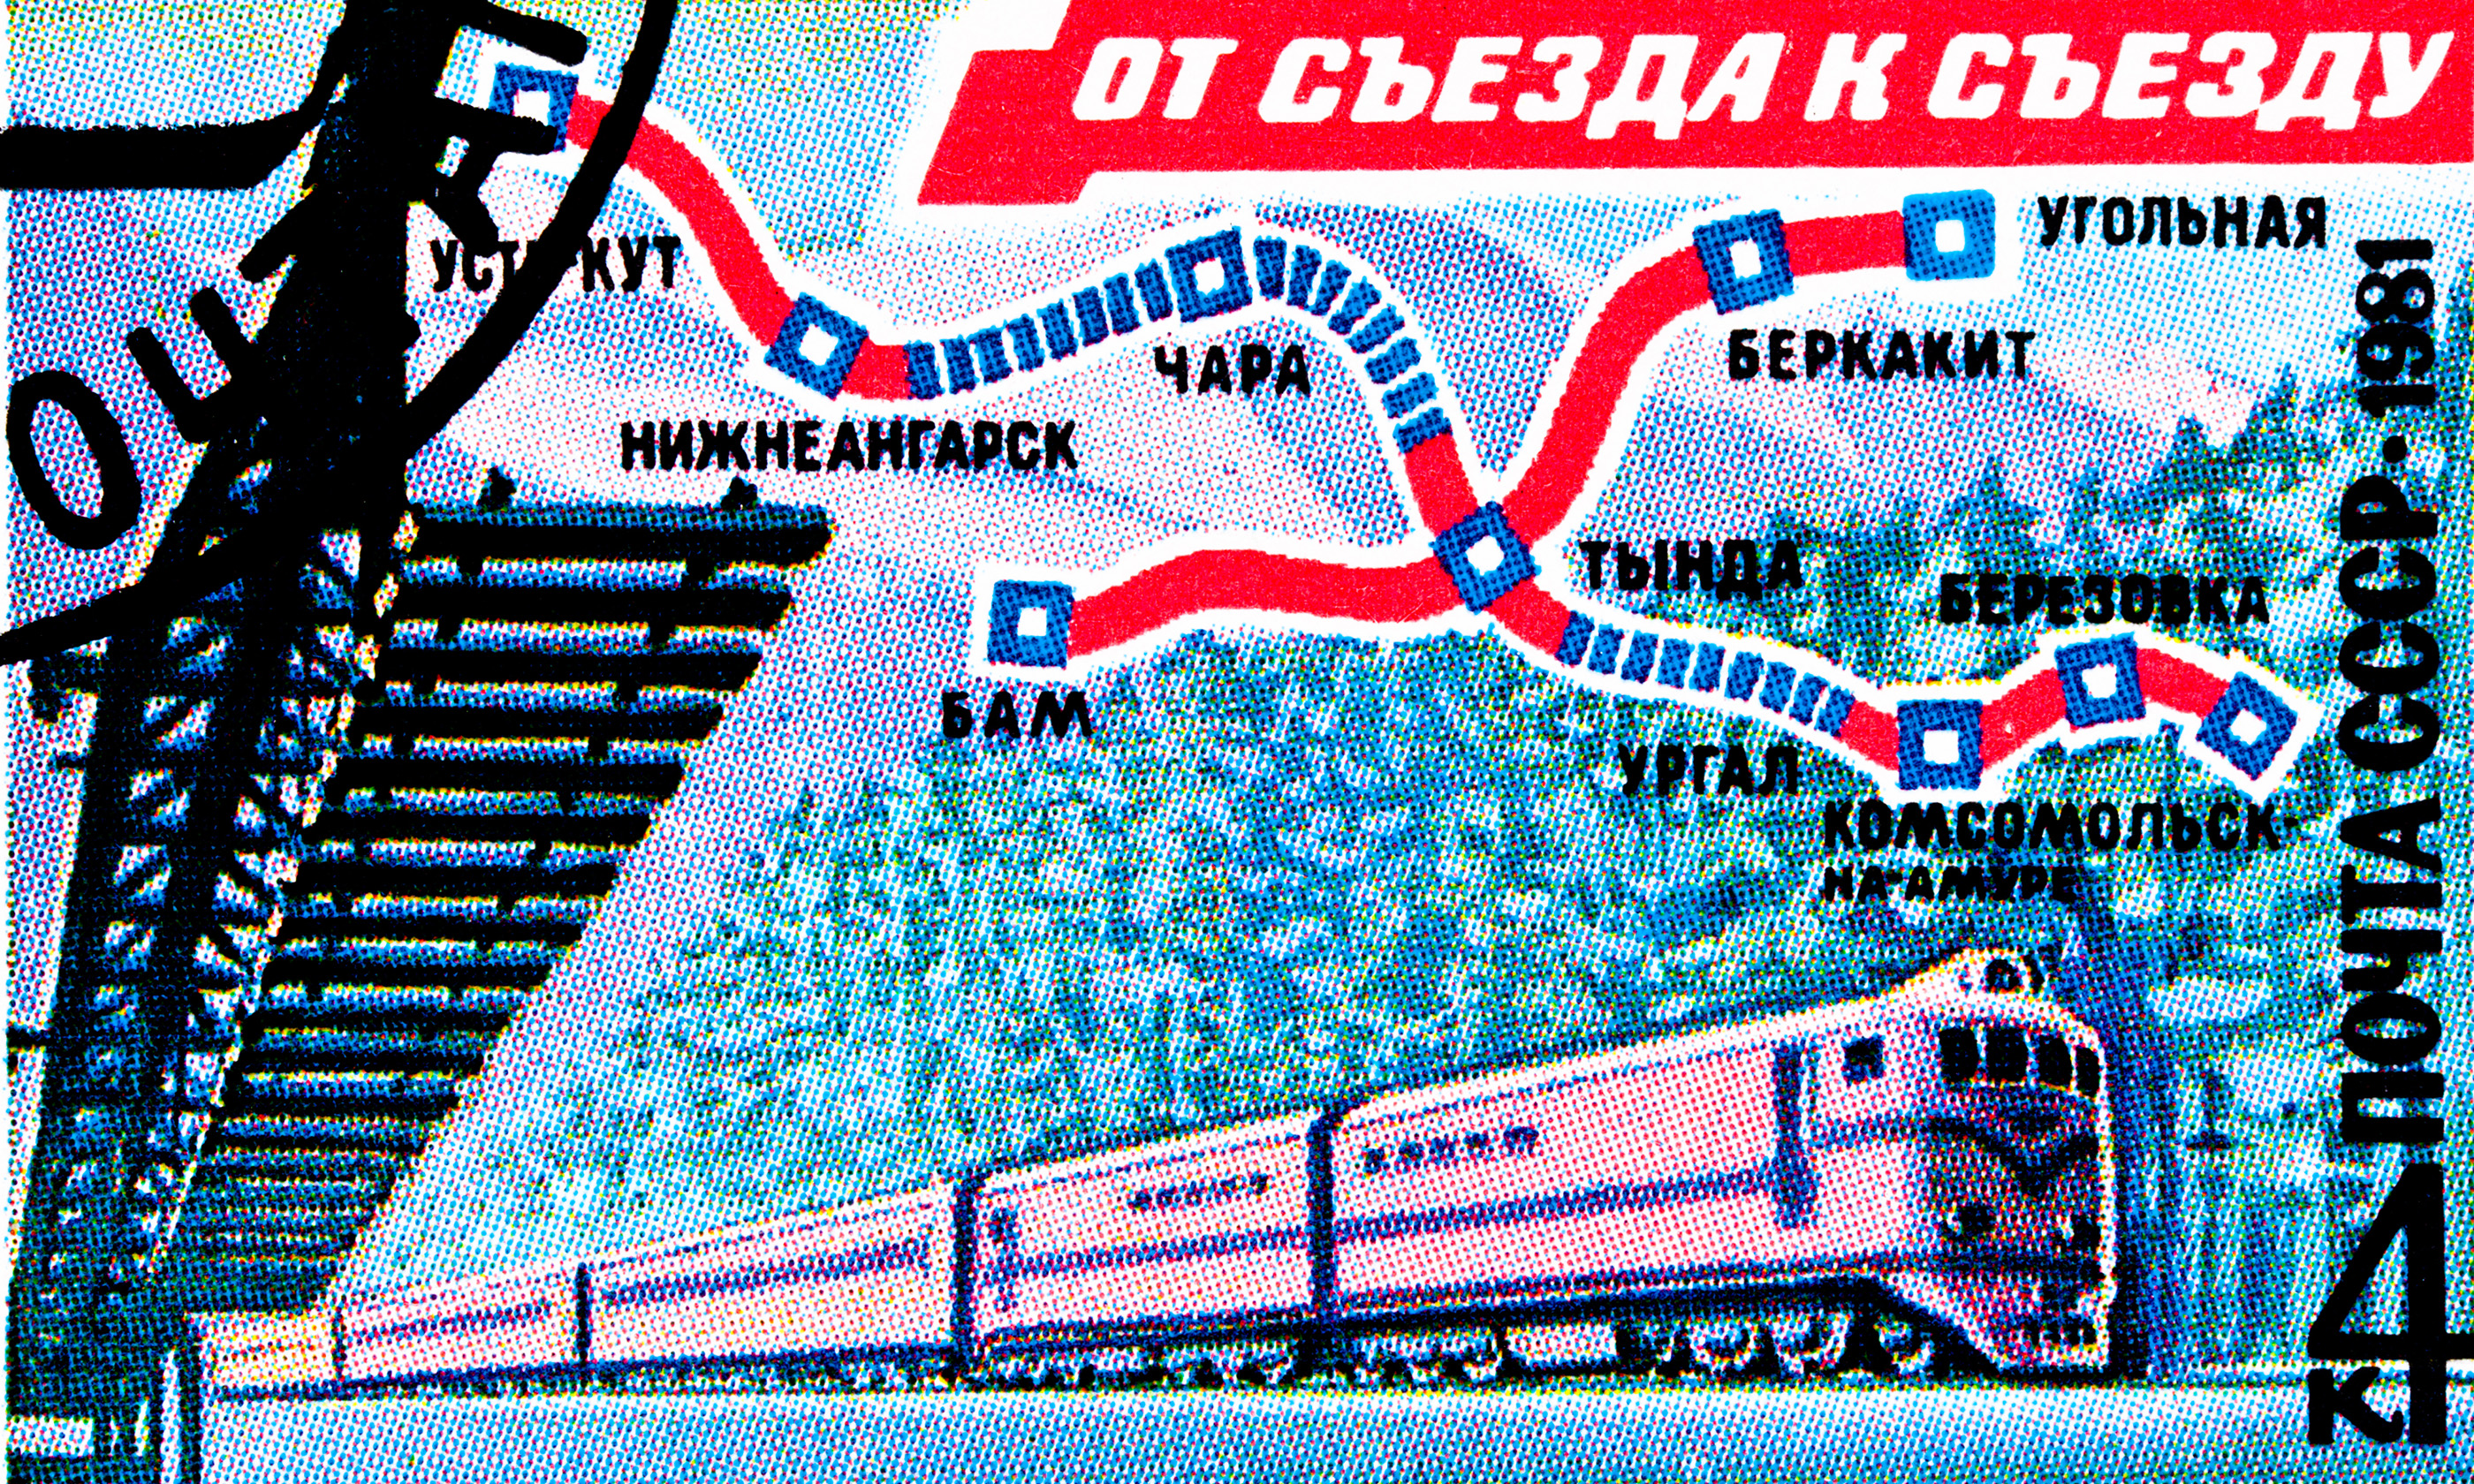 Russian stamp featuring the Trans Siberian Railway (Shutterstock: see main credit below)